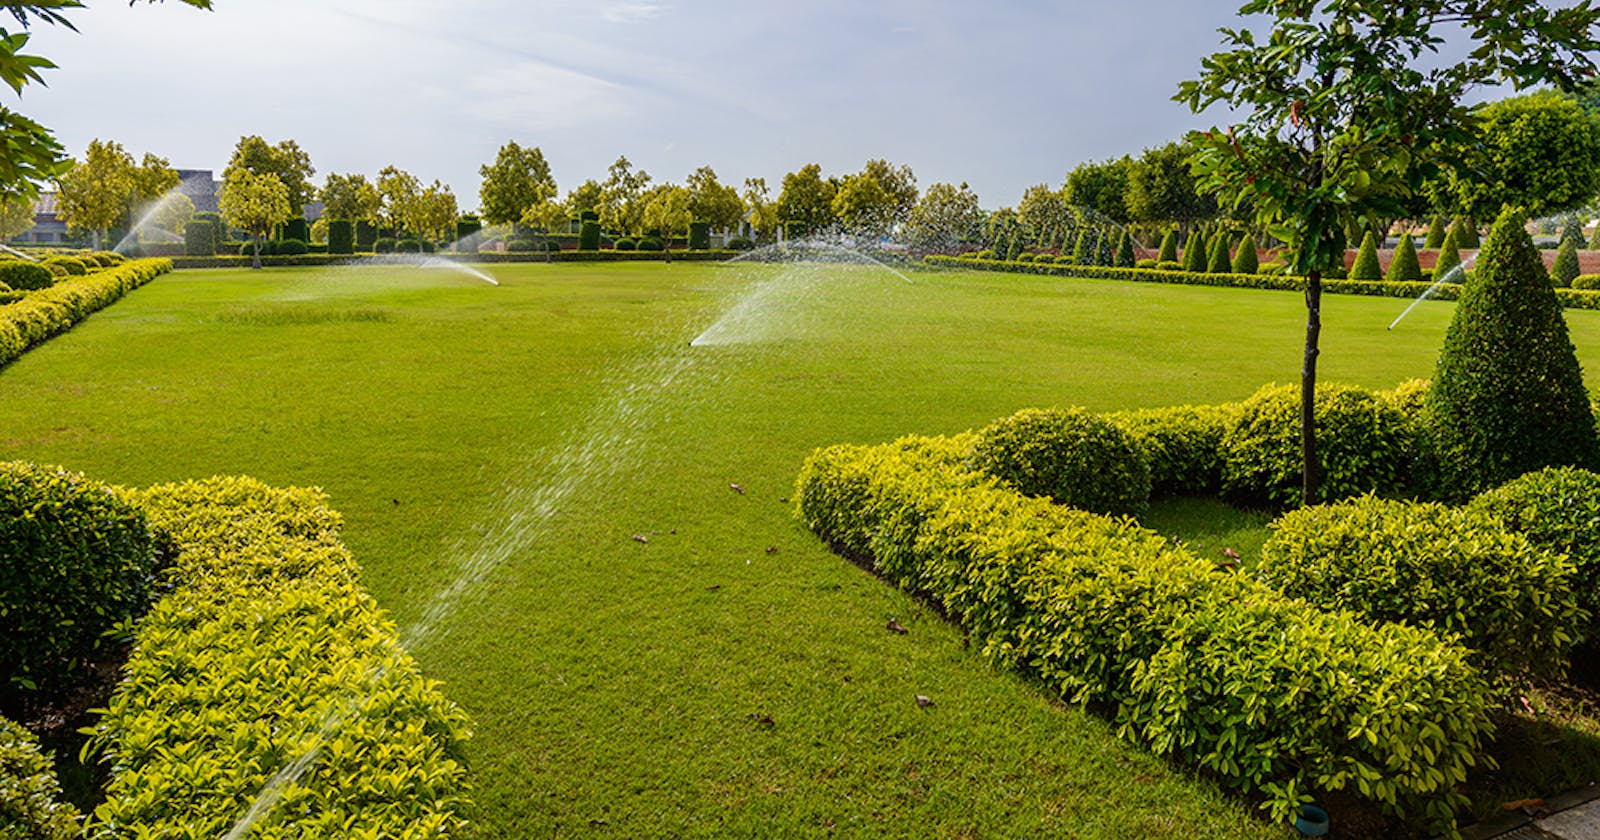 Factors to Consider When Getting an Irrigation System Installed